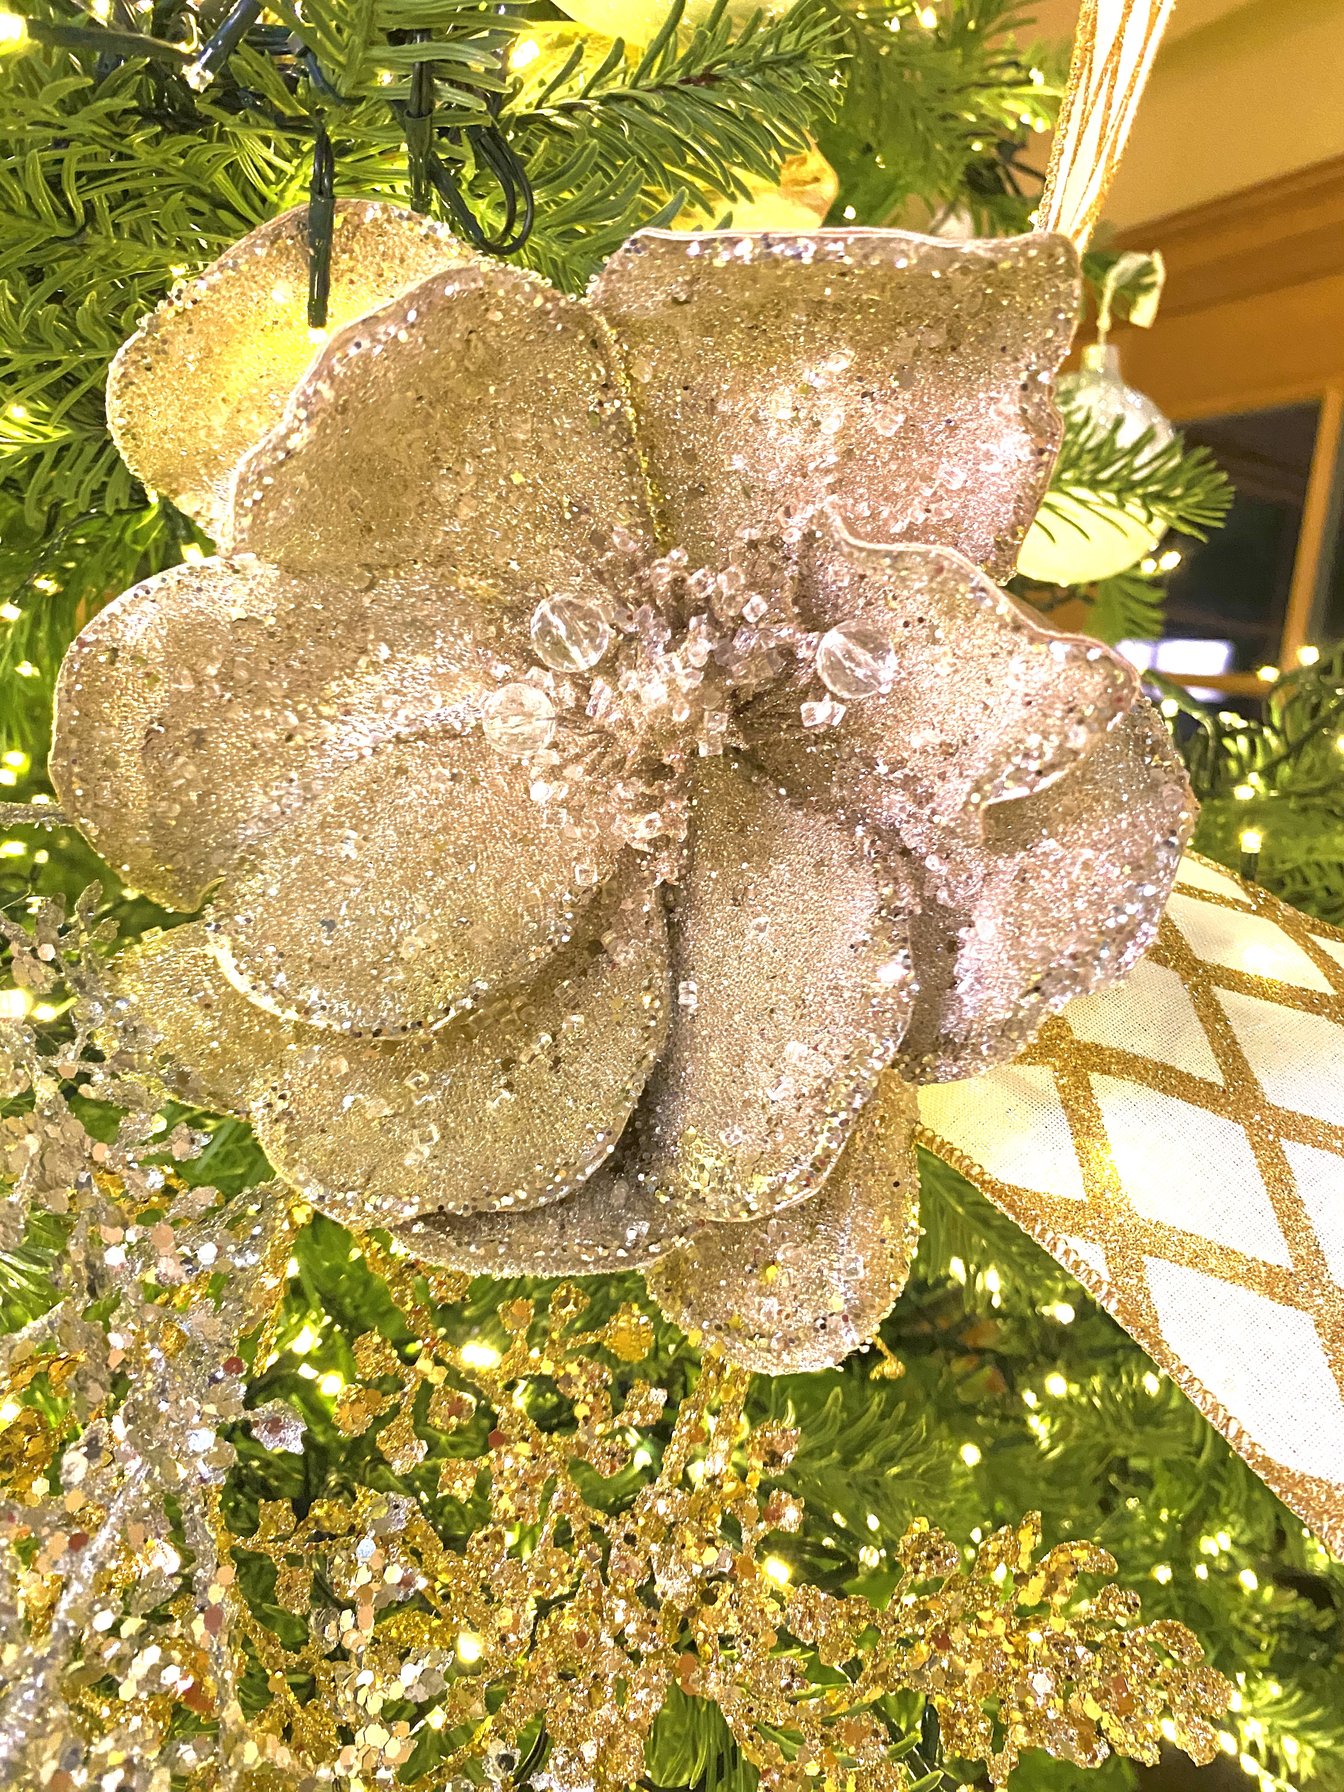 A Silver, Gold, and Gorgeous Christmas Tree! - Lisa Robertson